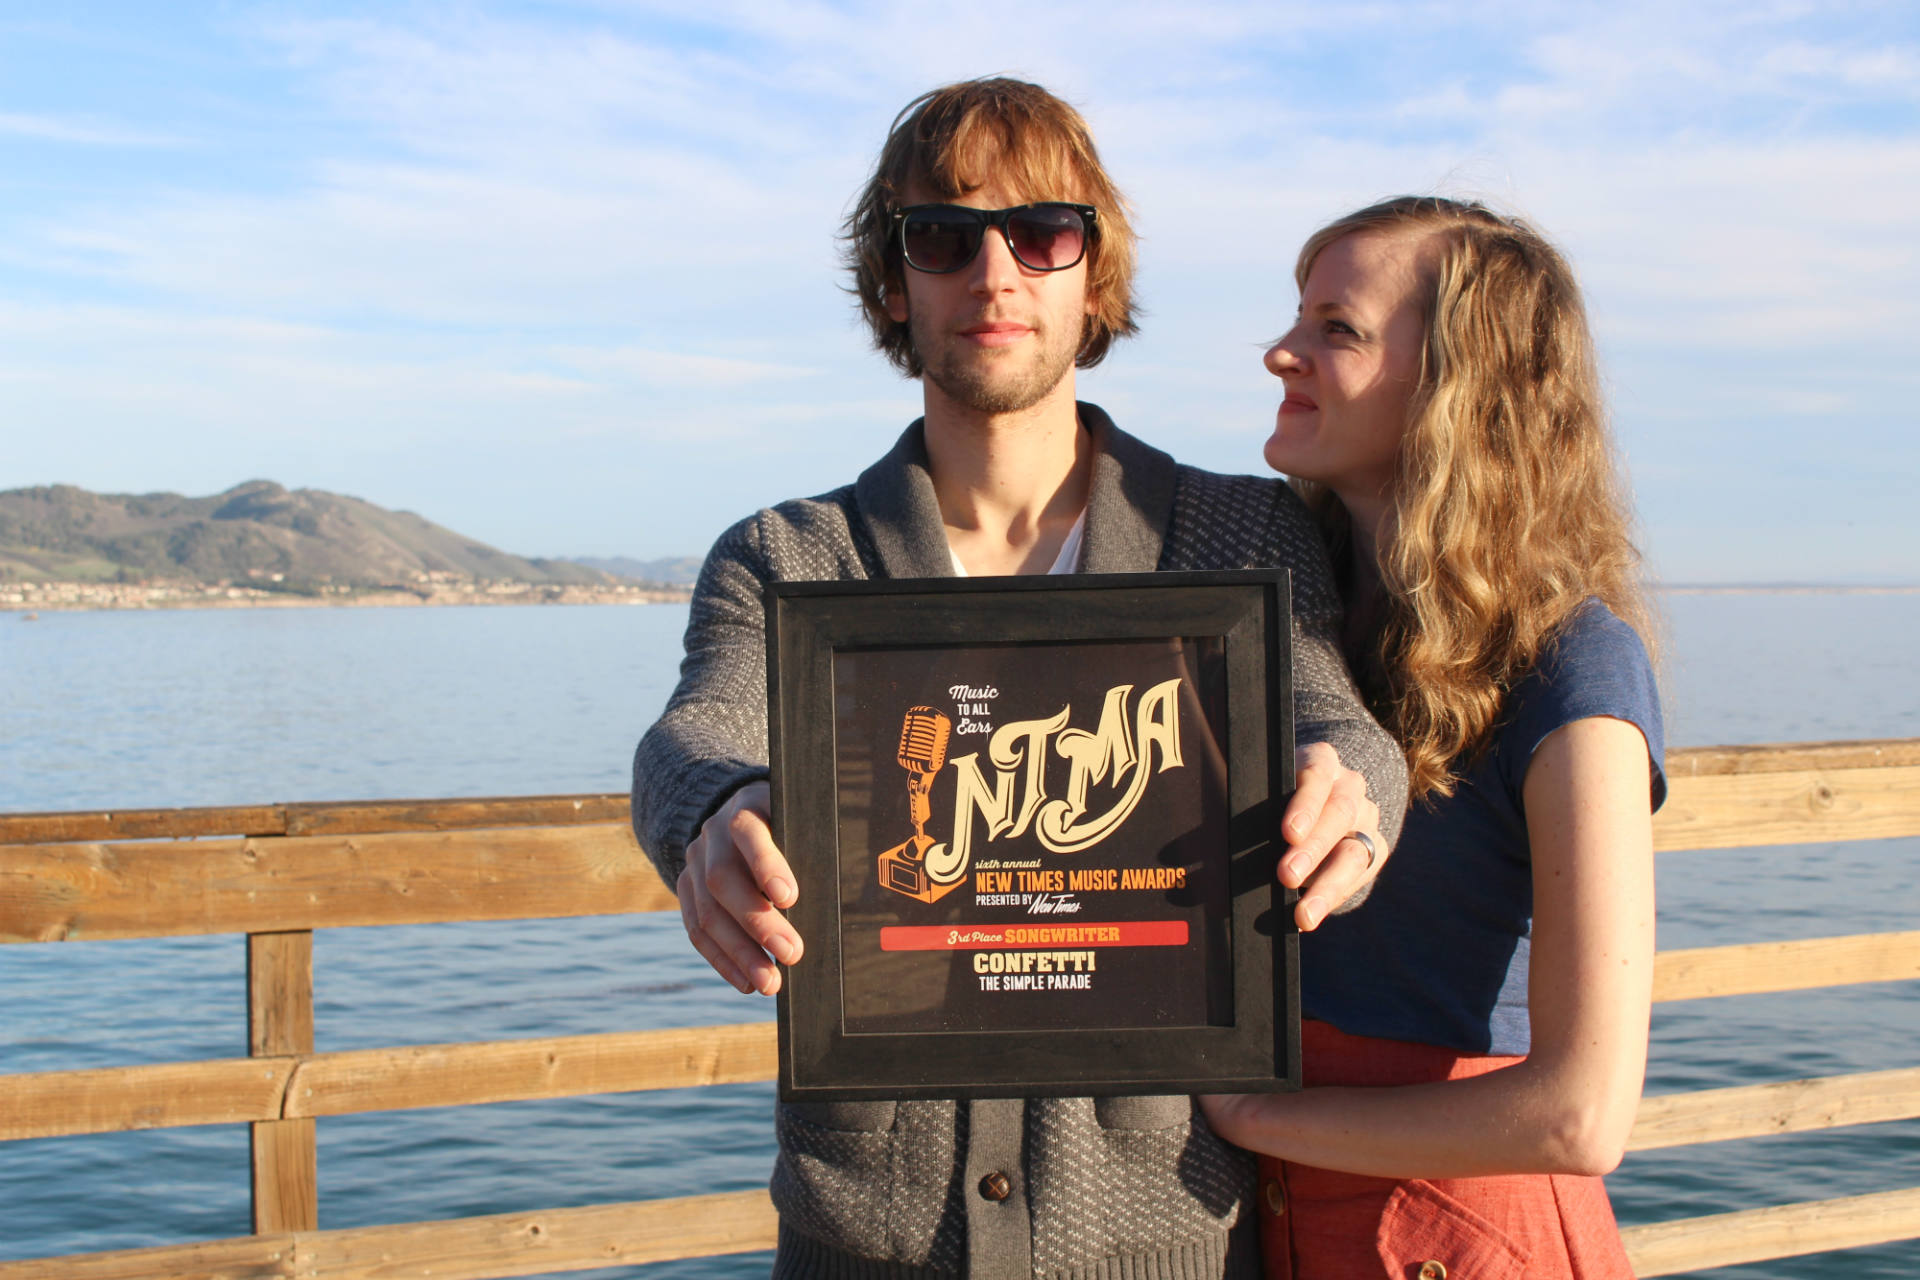 <b>An award well-deserved.</b>
Kayla Hooper beams at husband Justin as he holds up the third place songwriter award from New Times for the original song 'Confetti' in Avila Beach, California. 'The Simple Parade has a lot of meanings, but primarily it comes from the first song we wrote as a single called ‘Confetti’ that is meant to convey the message of enjoying the simple thrills of your parade.' 
